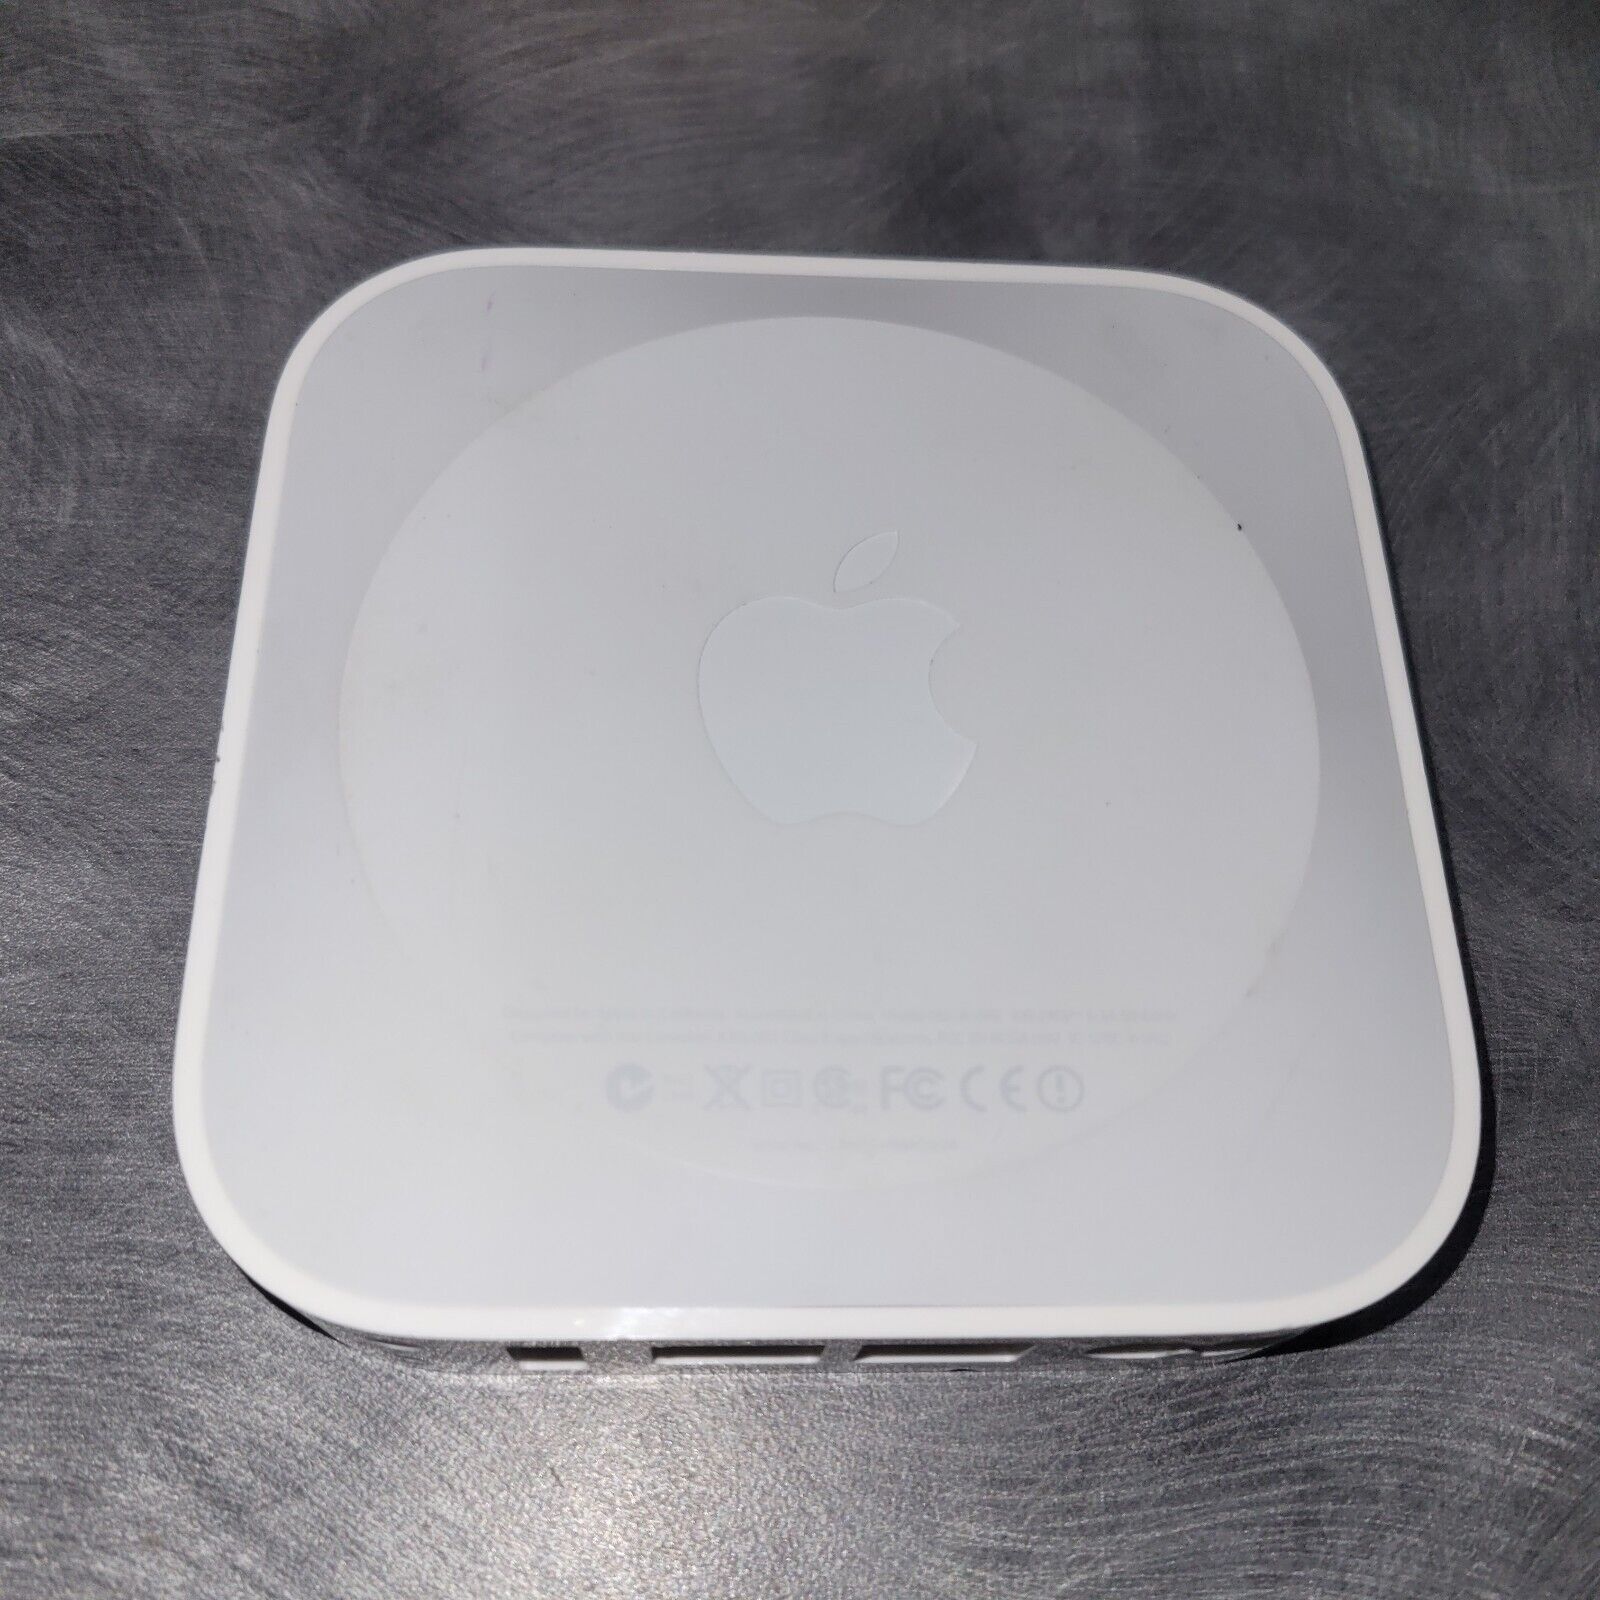 Apple AirPort Express Base Station [2nd Gen] Router White A1392 - No Cable